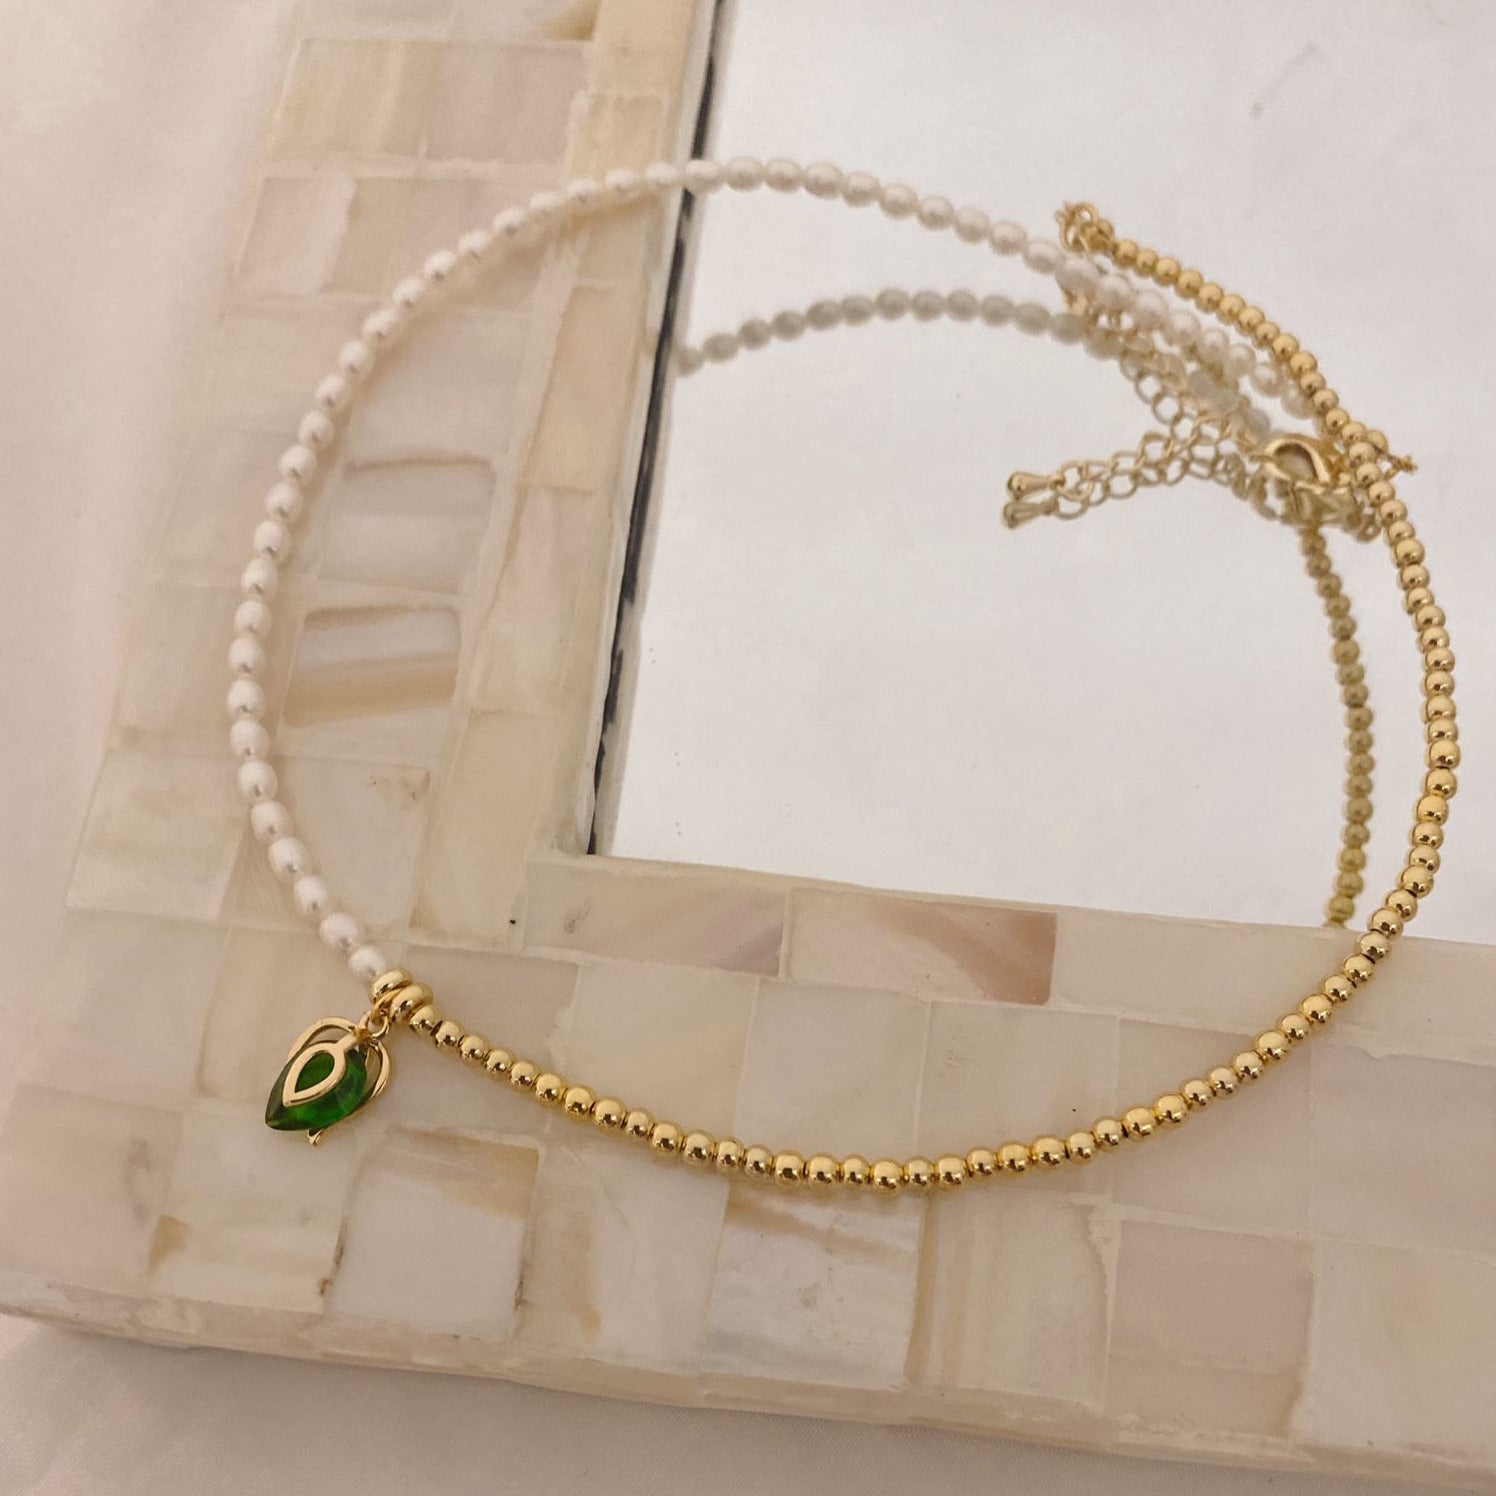 Half Pearl and Gold Necklace with Leaf Charm